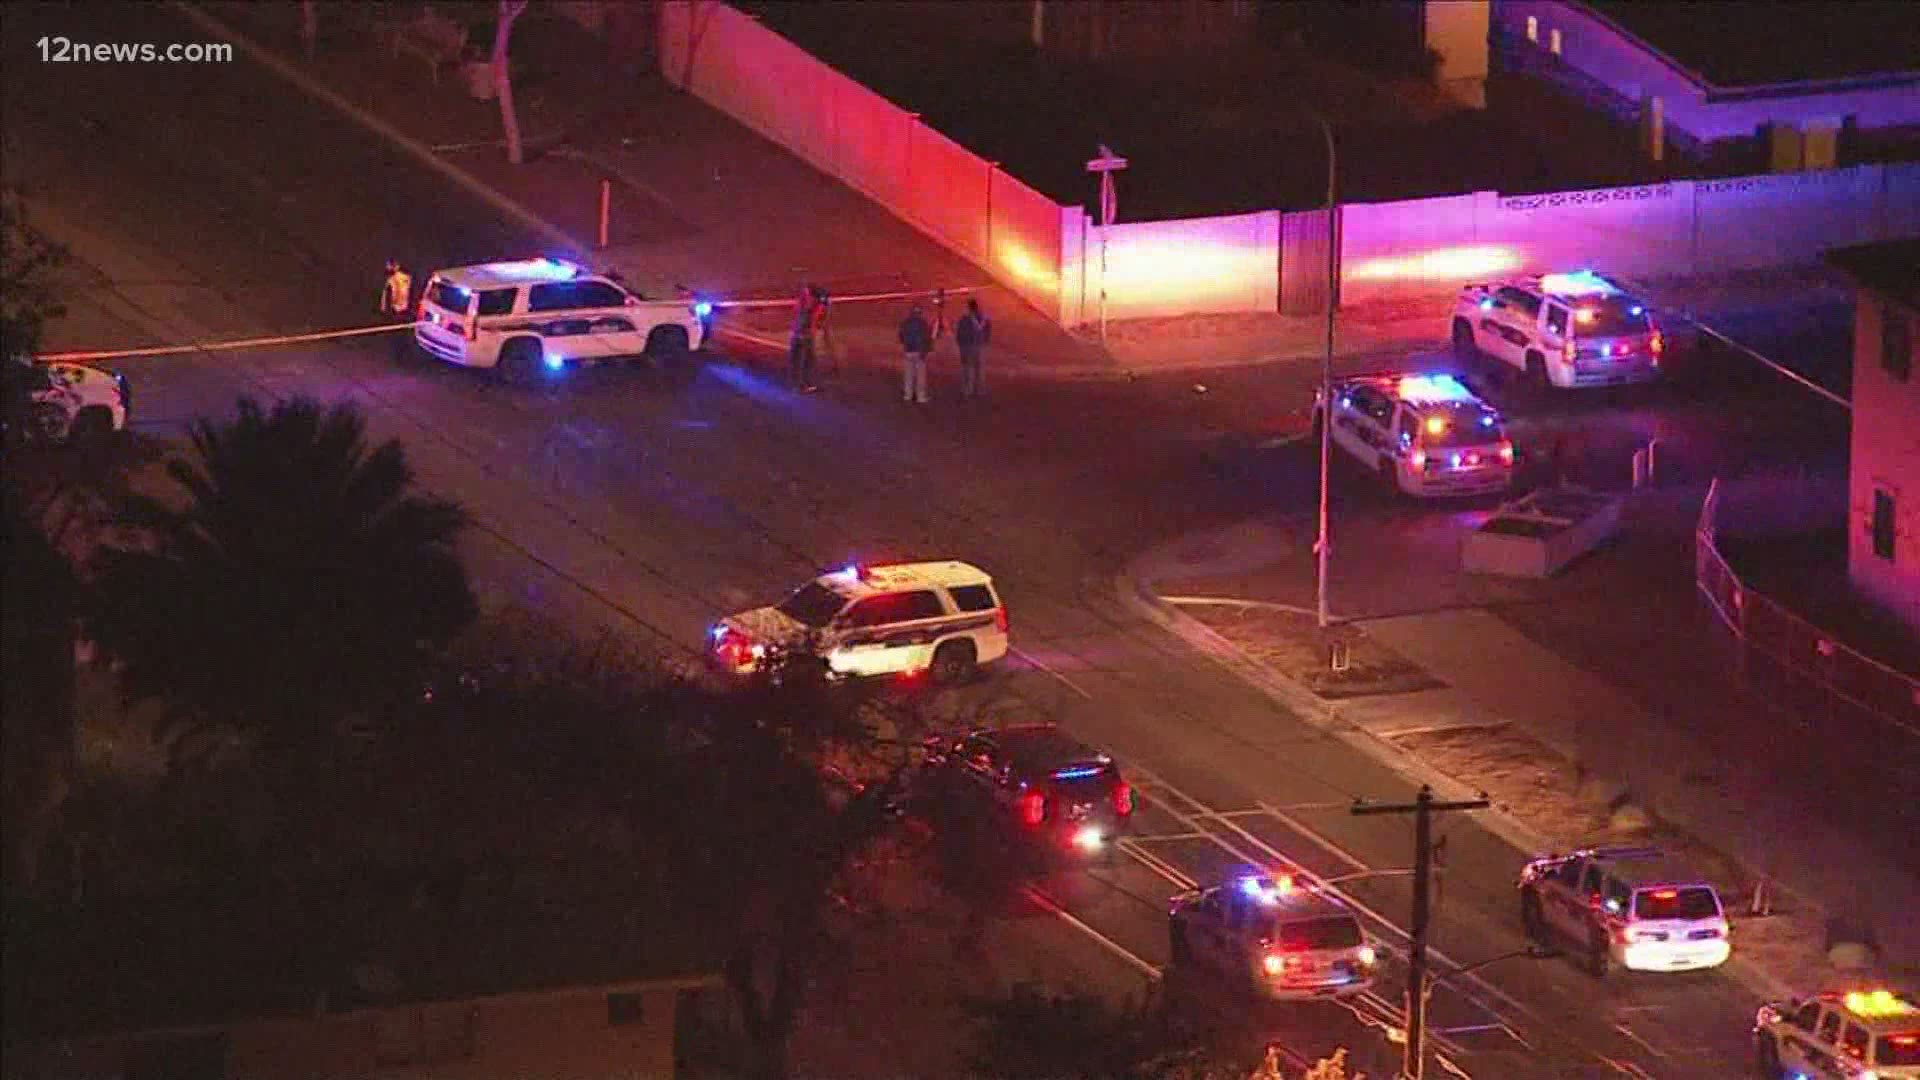 The shooting happened near 27th and Glendale avenues.